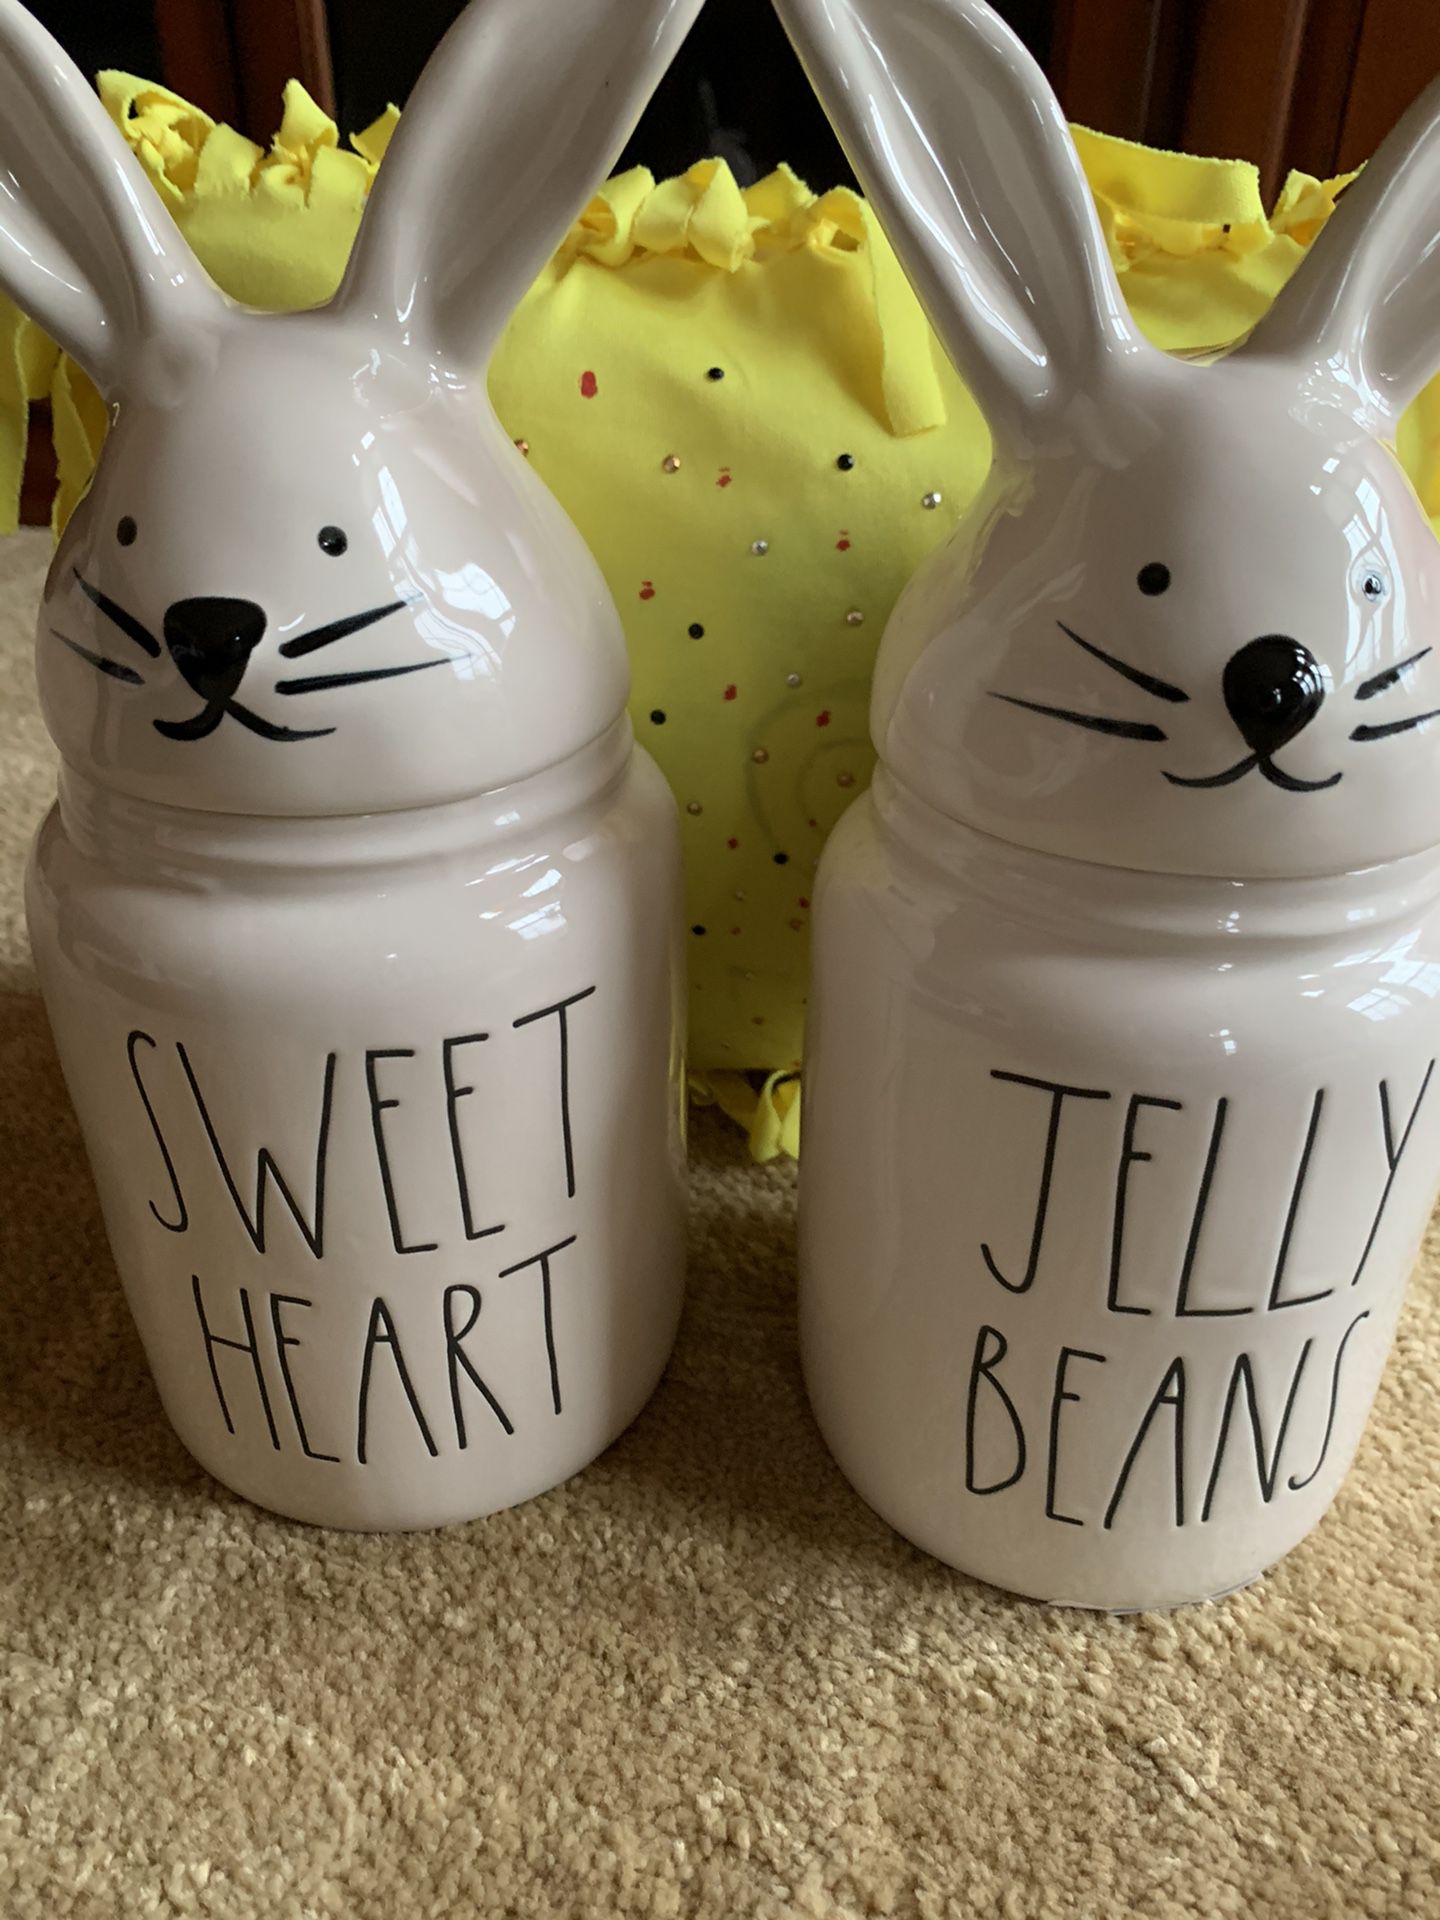 Rae Dunn easter Bunny head SWEETHEART & JELLY BEANS canisters new